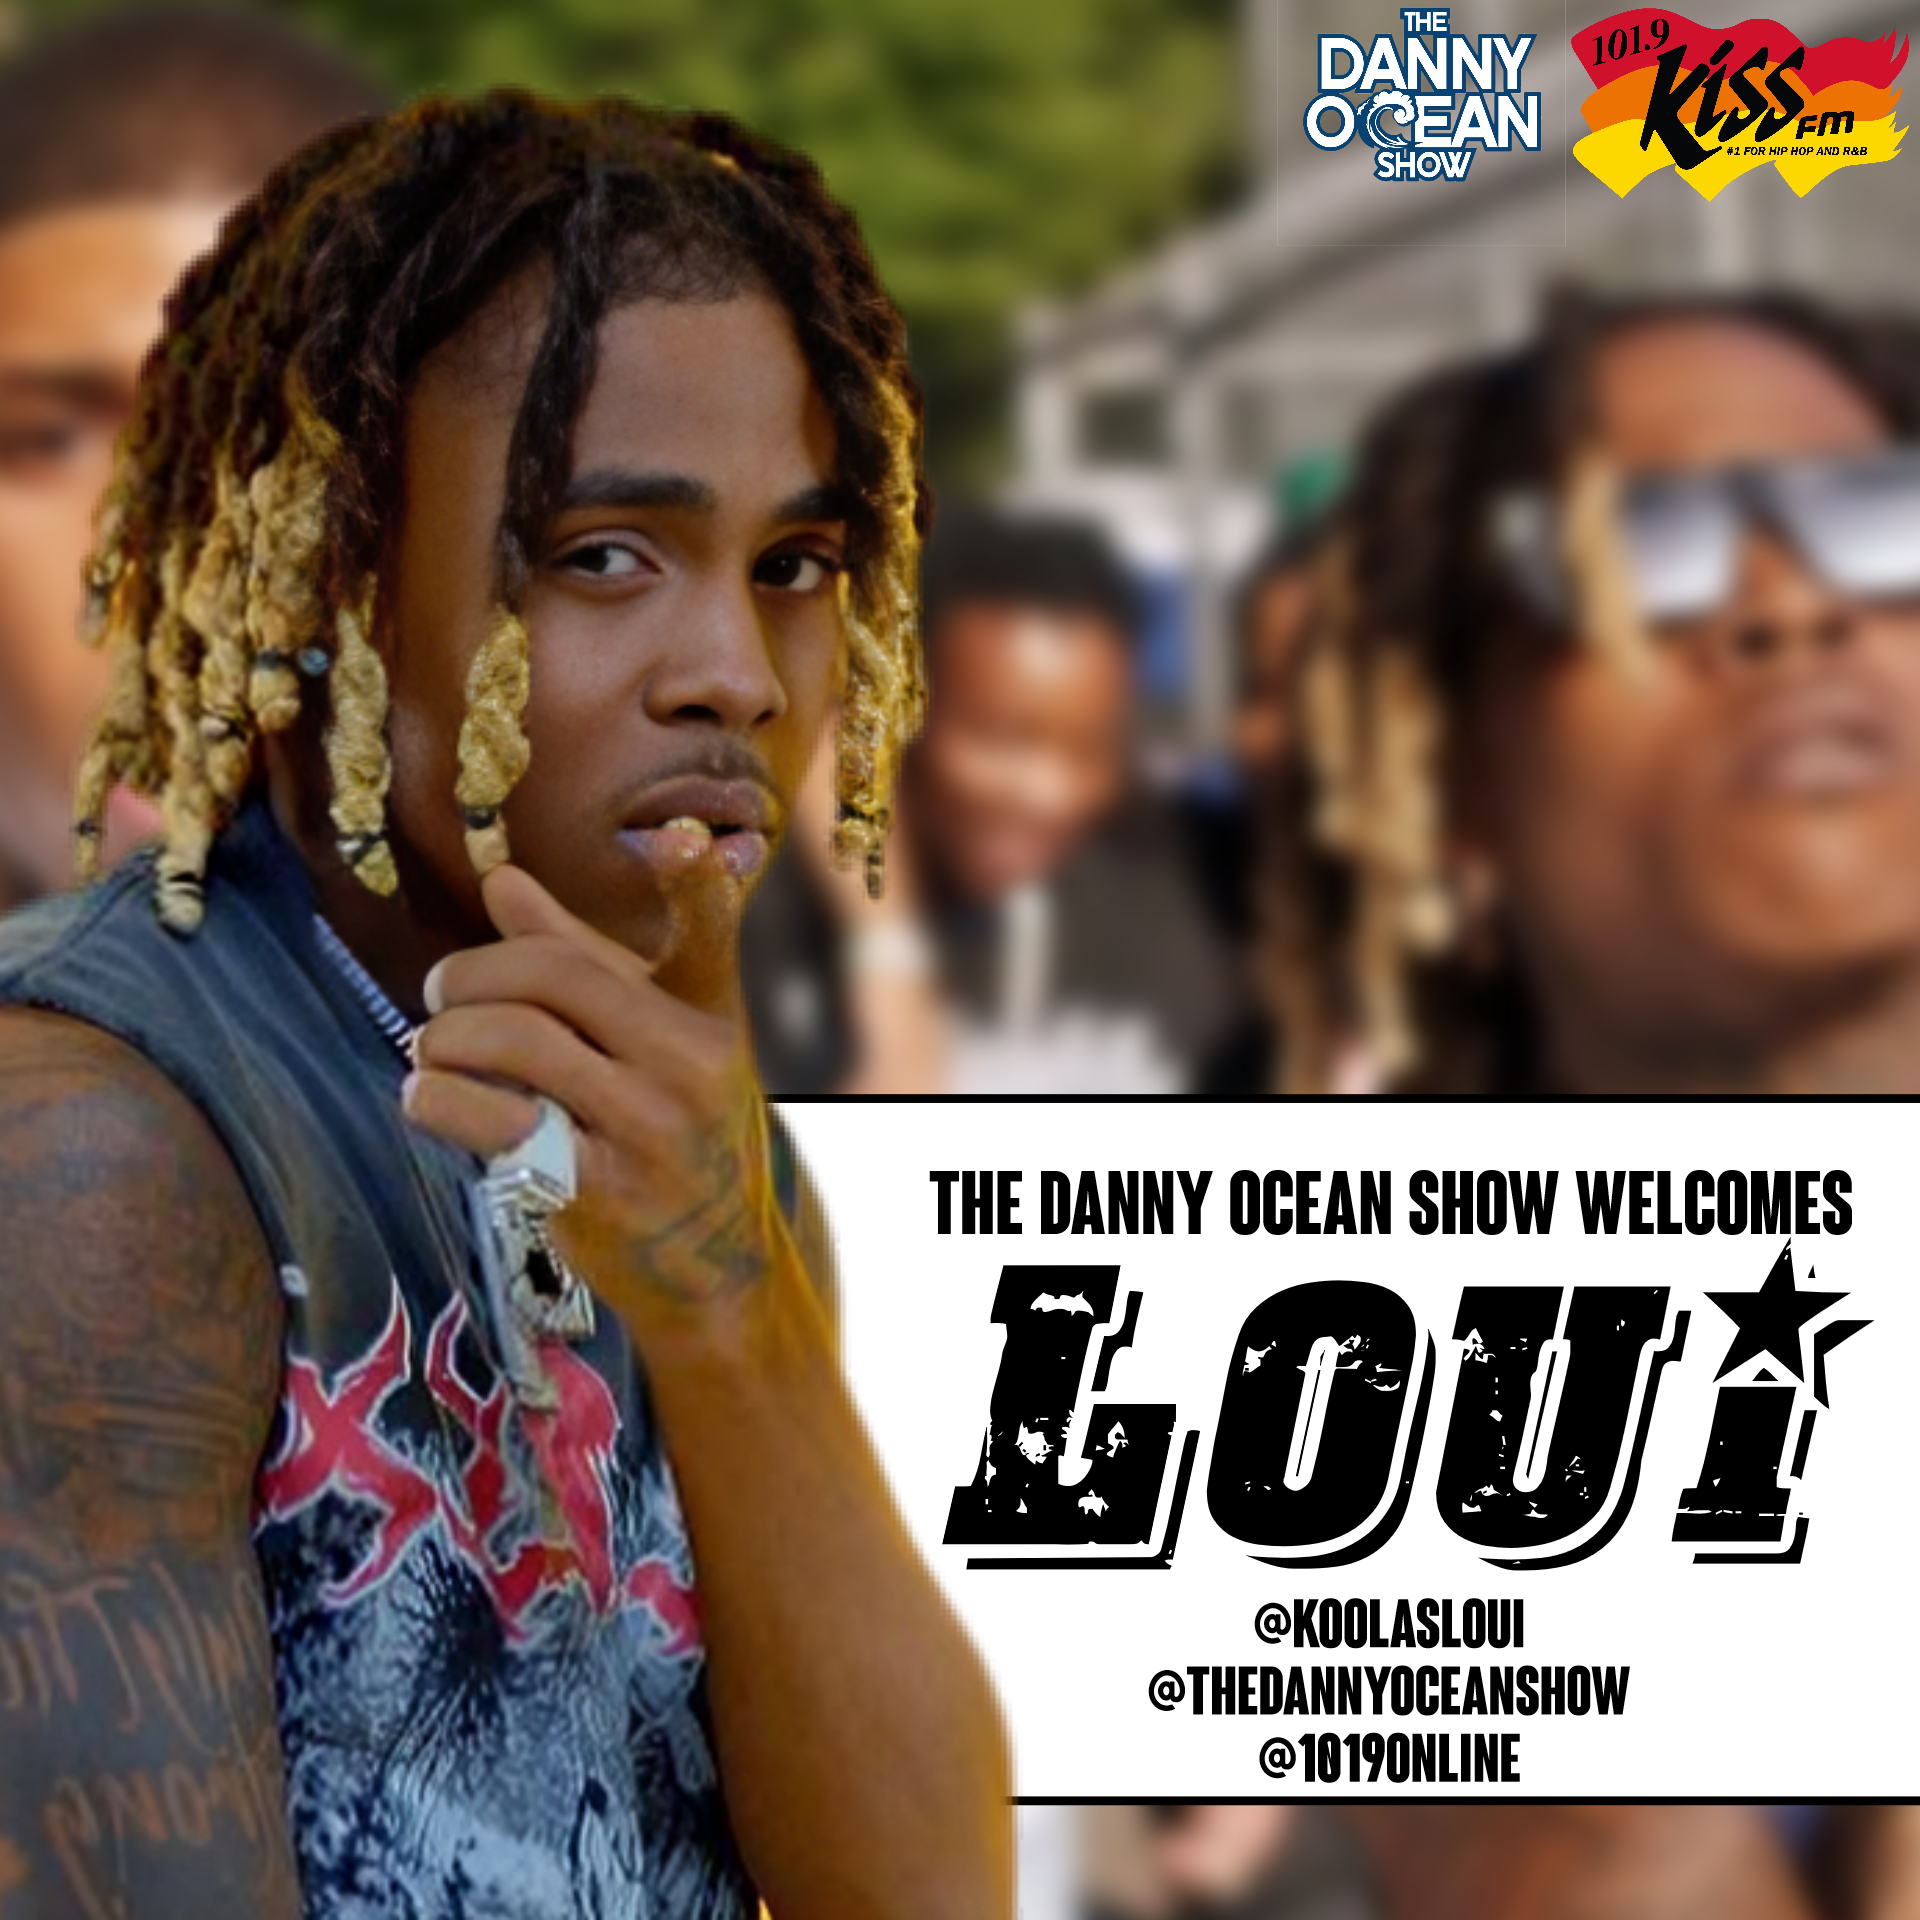 The Danny Ocean Show Welcomes: LOUI